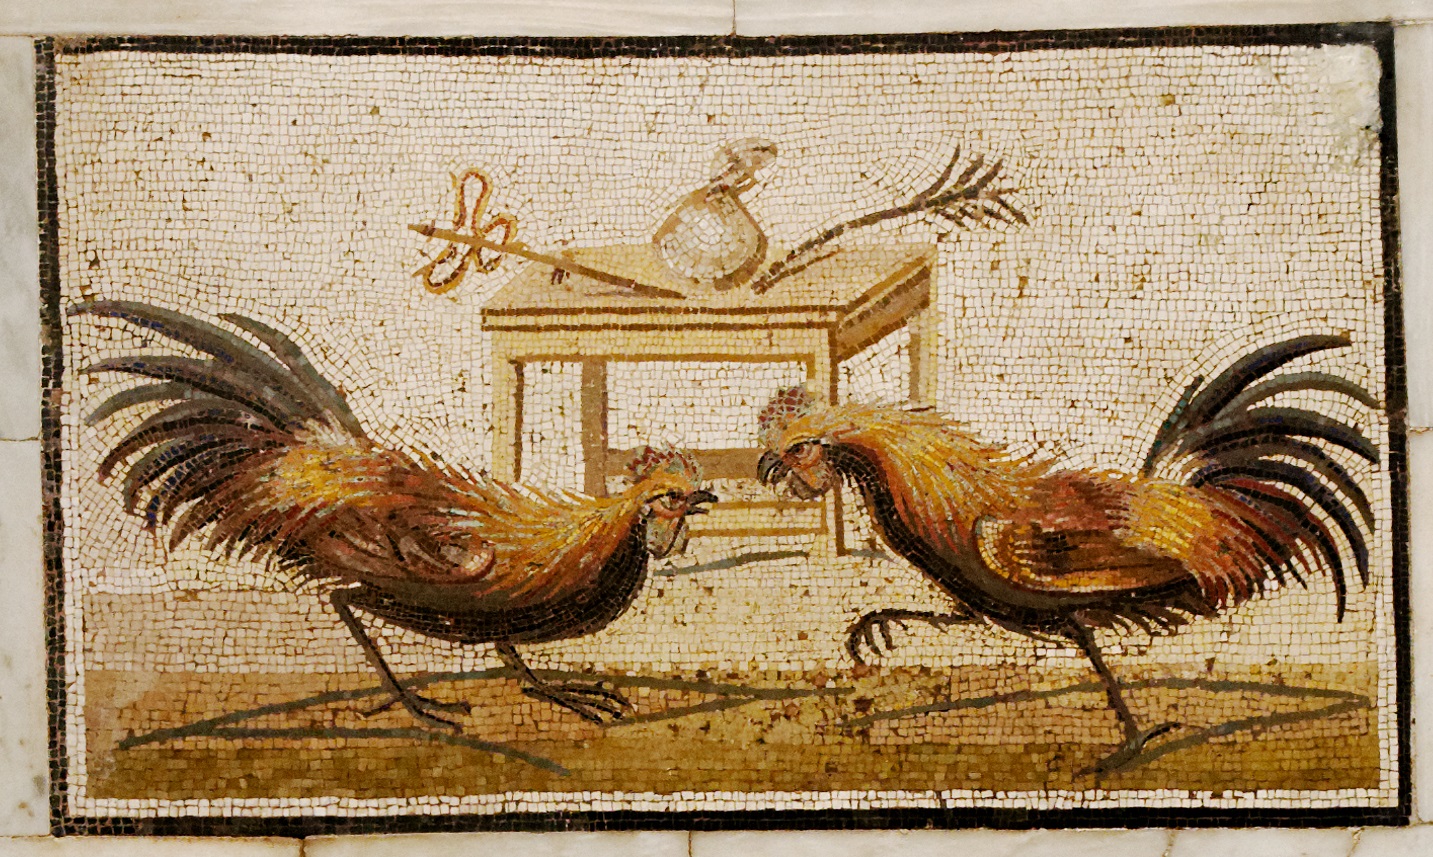 Roman mosaic depicting a cockfight. Two roosters meet in combat before a table displaying the winner's prizes (from right to left: a caduceus [symbol of Mercury, patron of gamblers]; a moneybag; and a palm of victory).